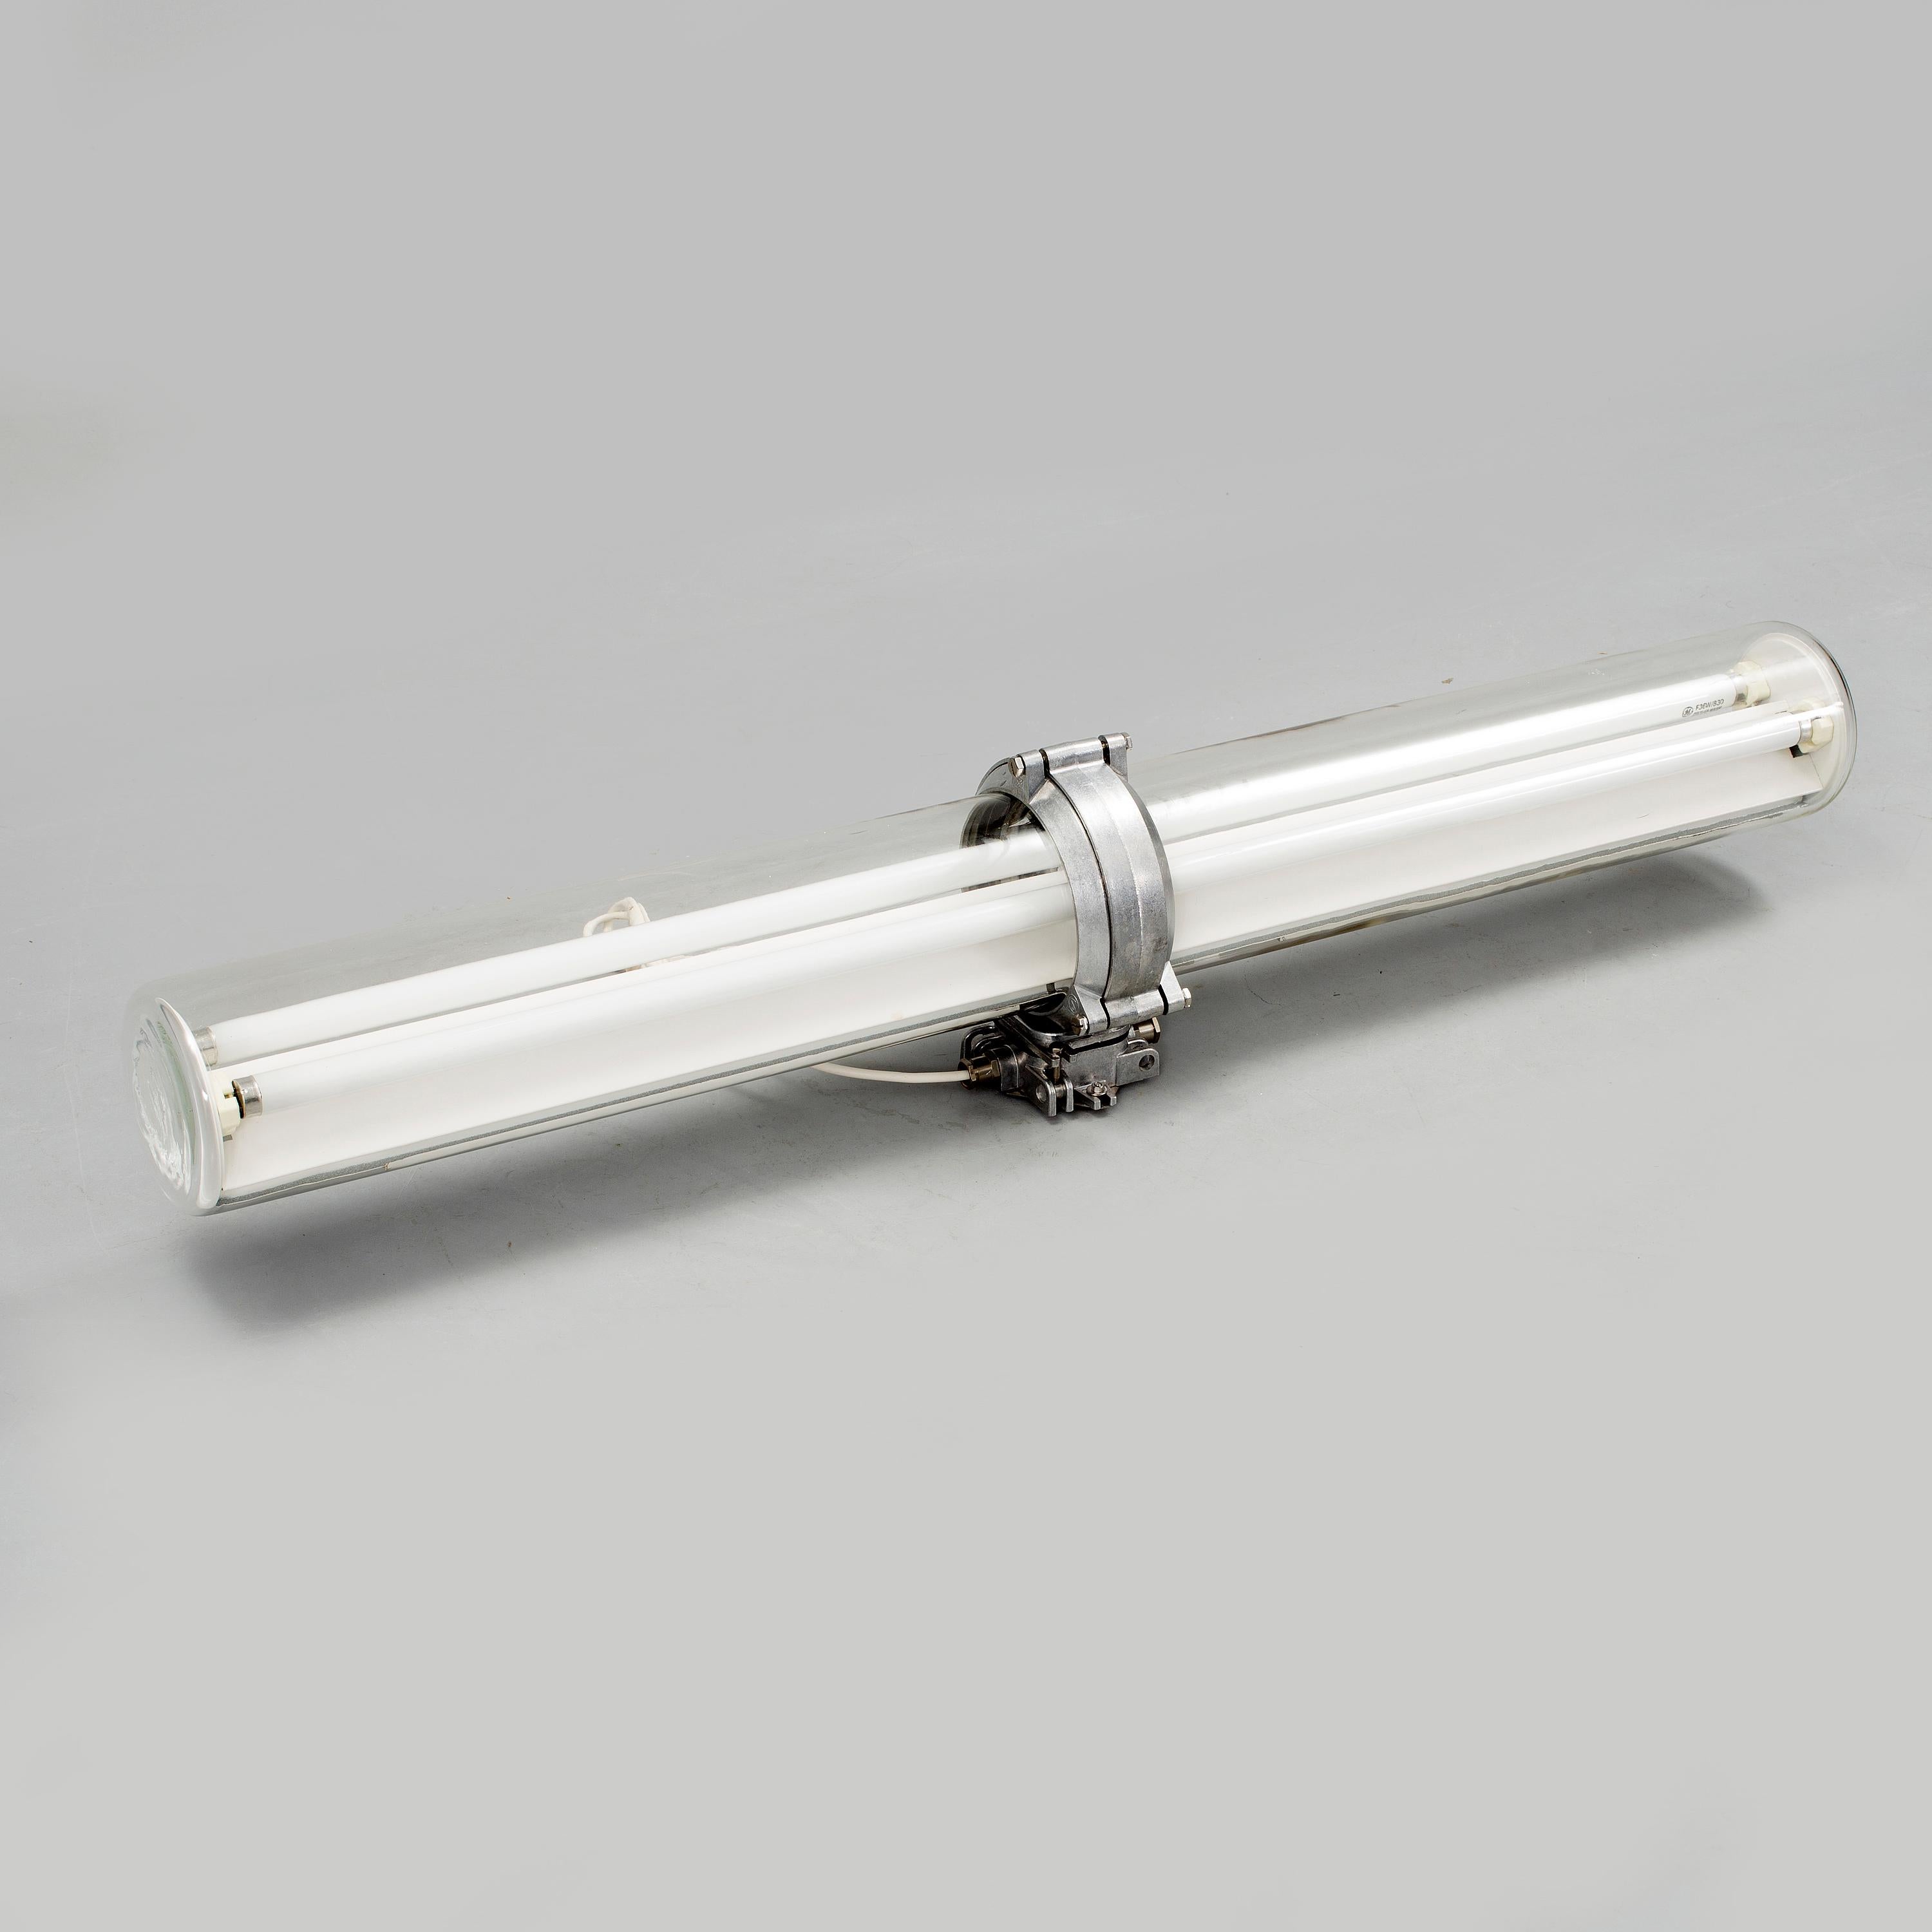 Exaktor neon tube Industrial lighting, produced in mid-20th century. Cylinder-shaped glass casing to aluminium mounts. Model to be mounted on celling or wall.